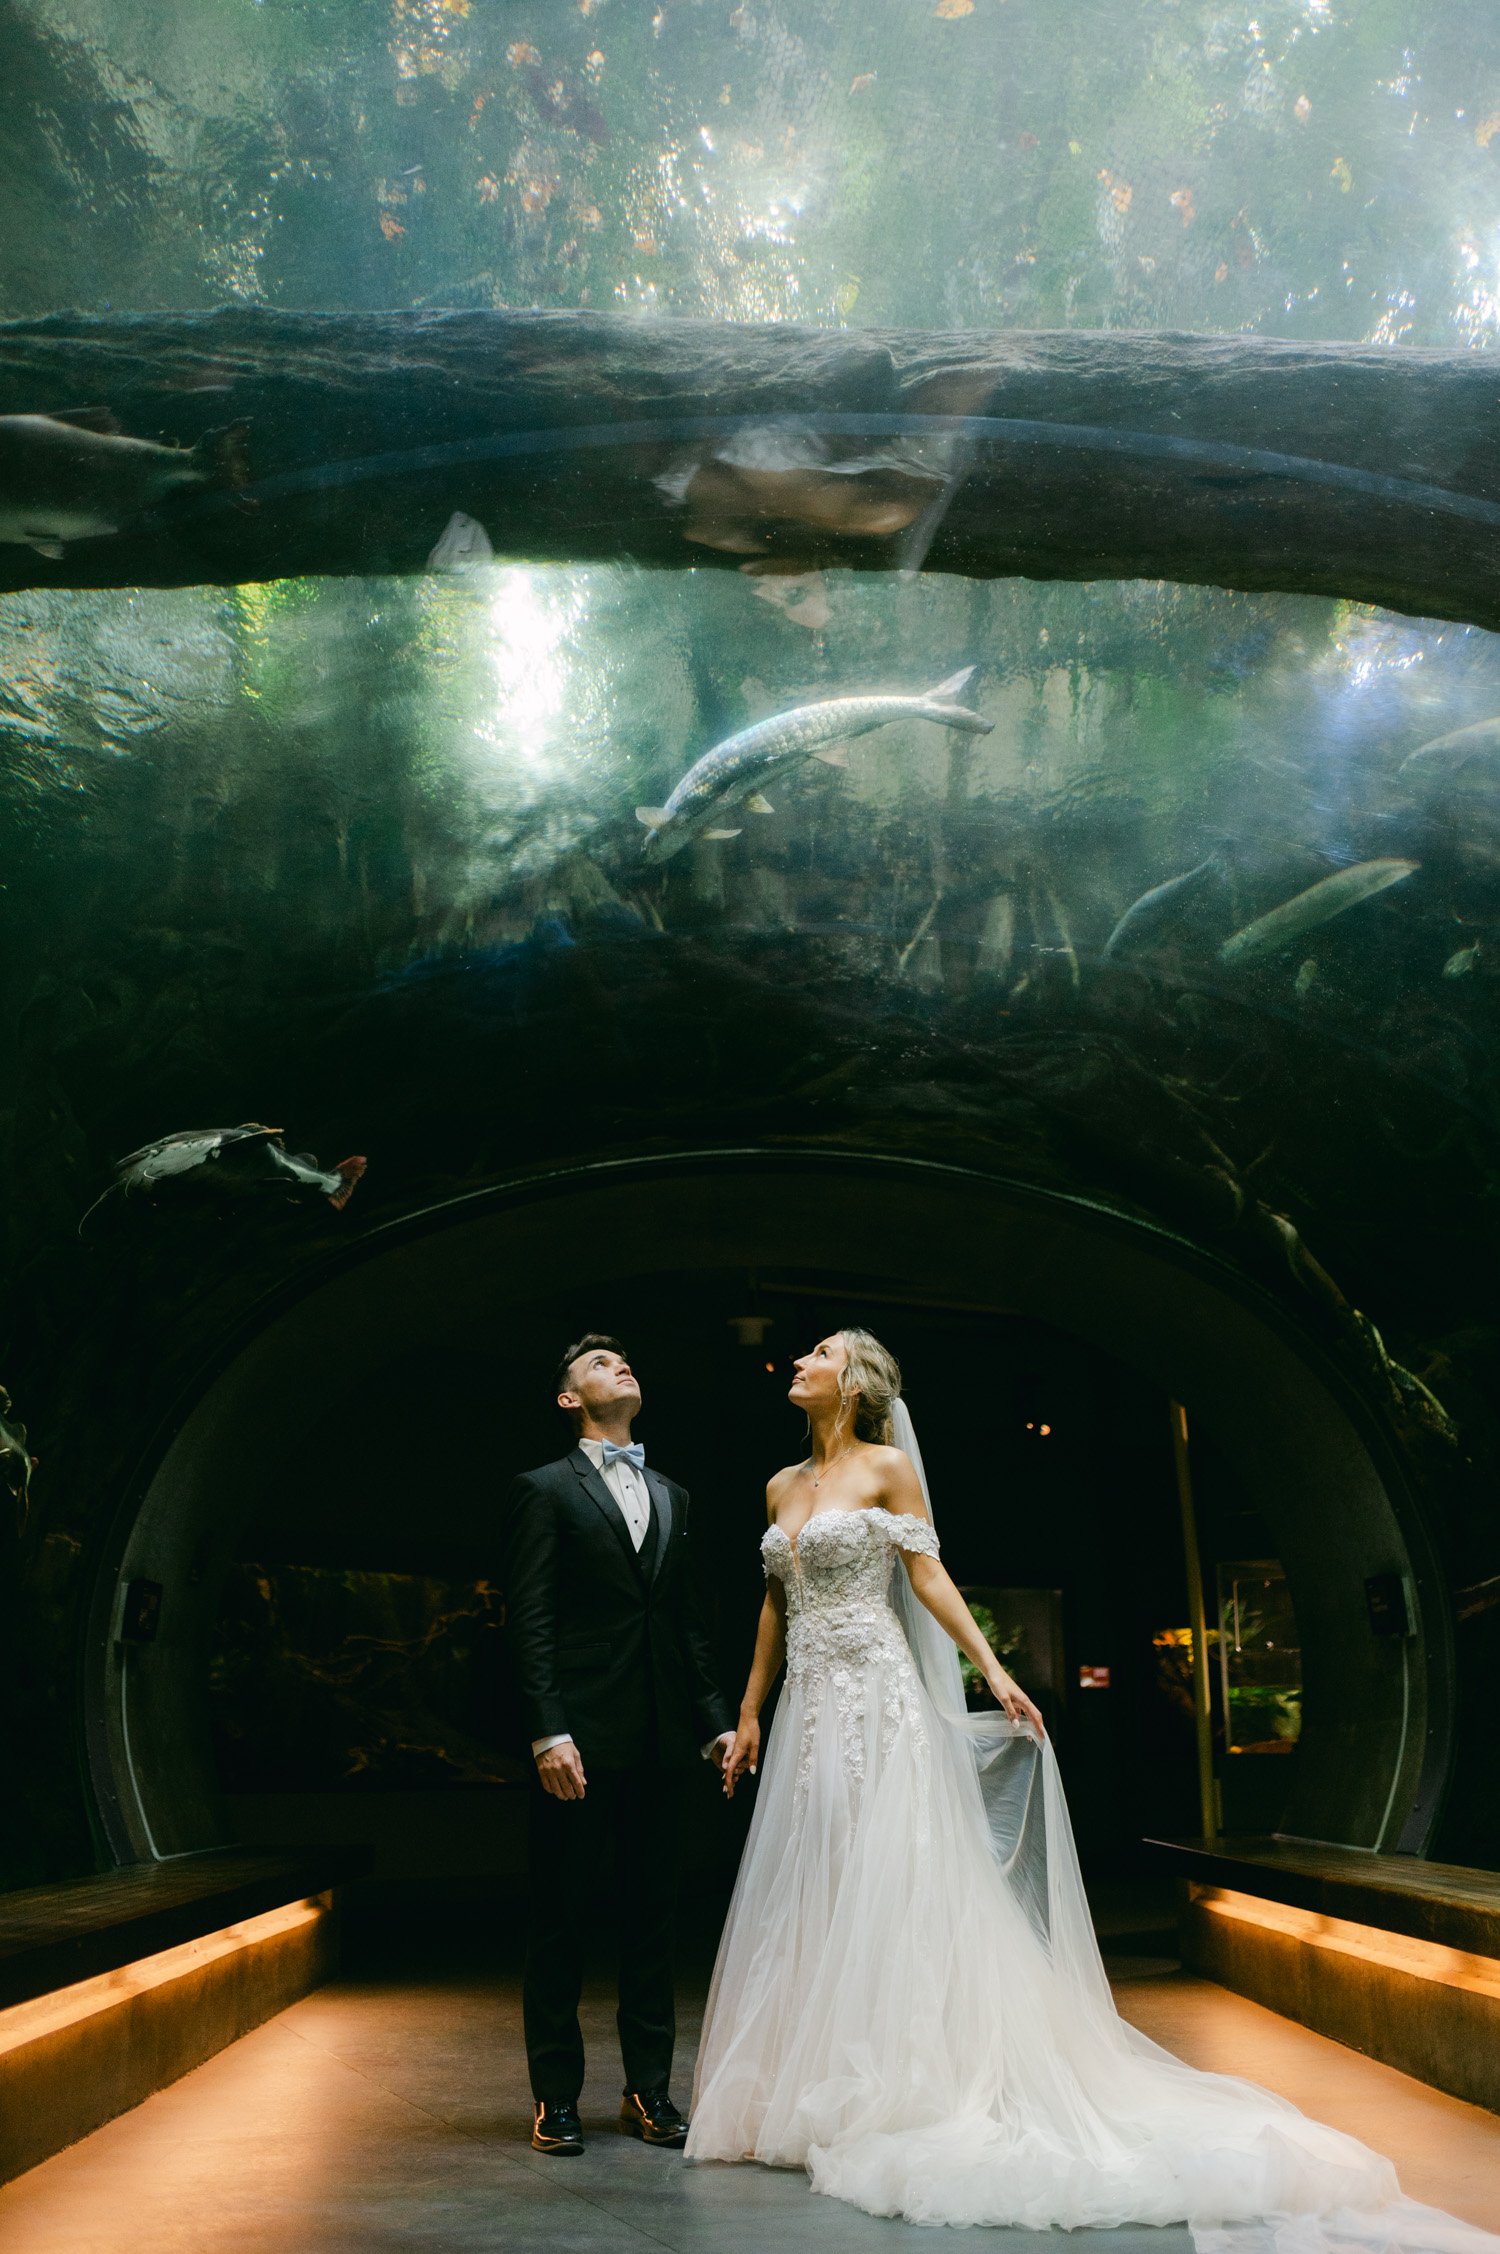 California academy of Sciences in San Francisco Wedding, photo of the couple in the aquarium looking up to the fishes